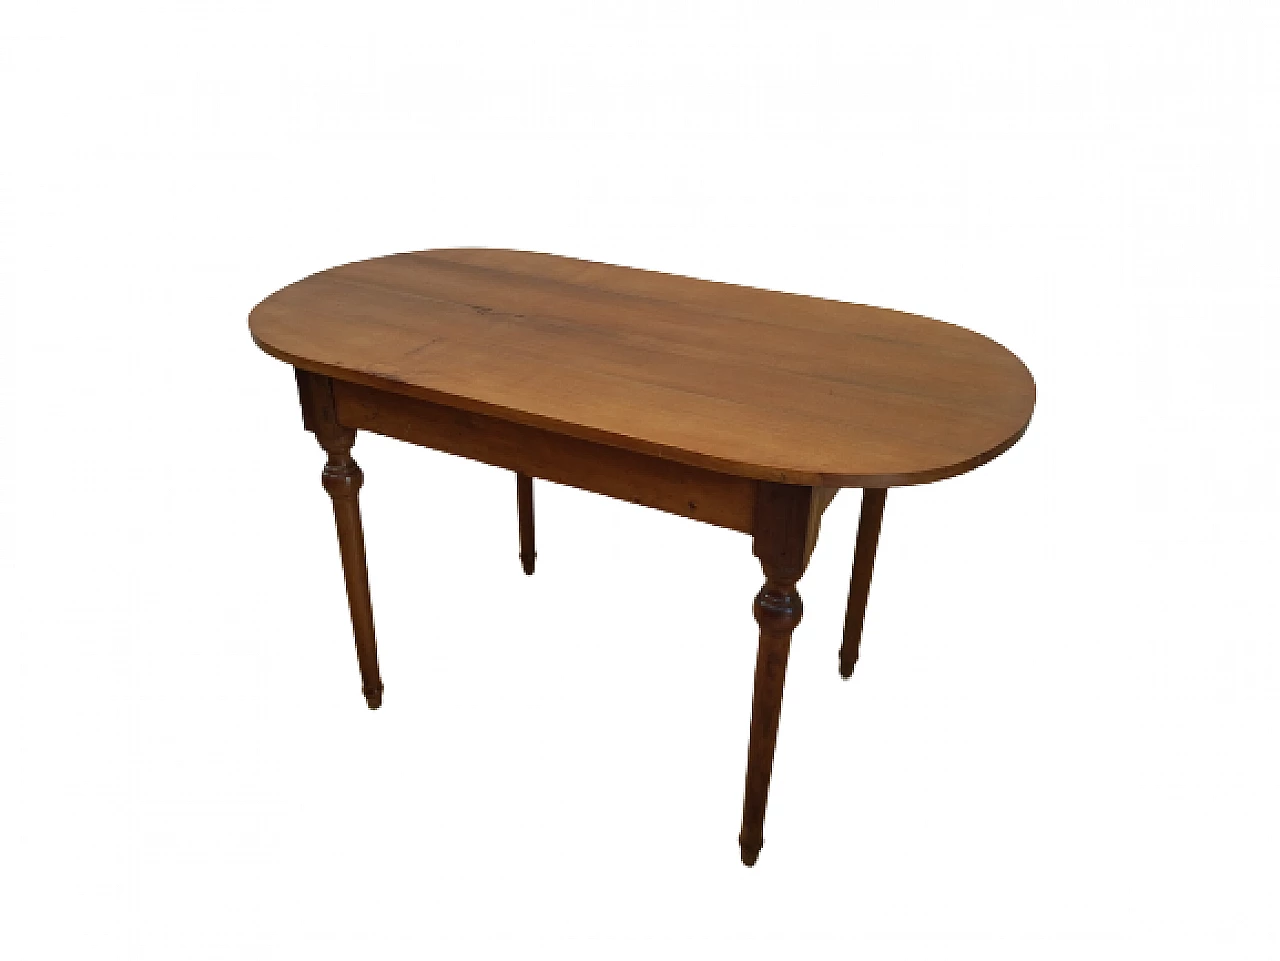 Walnut and beech table with oval top, late 19th century 1